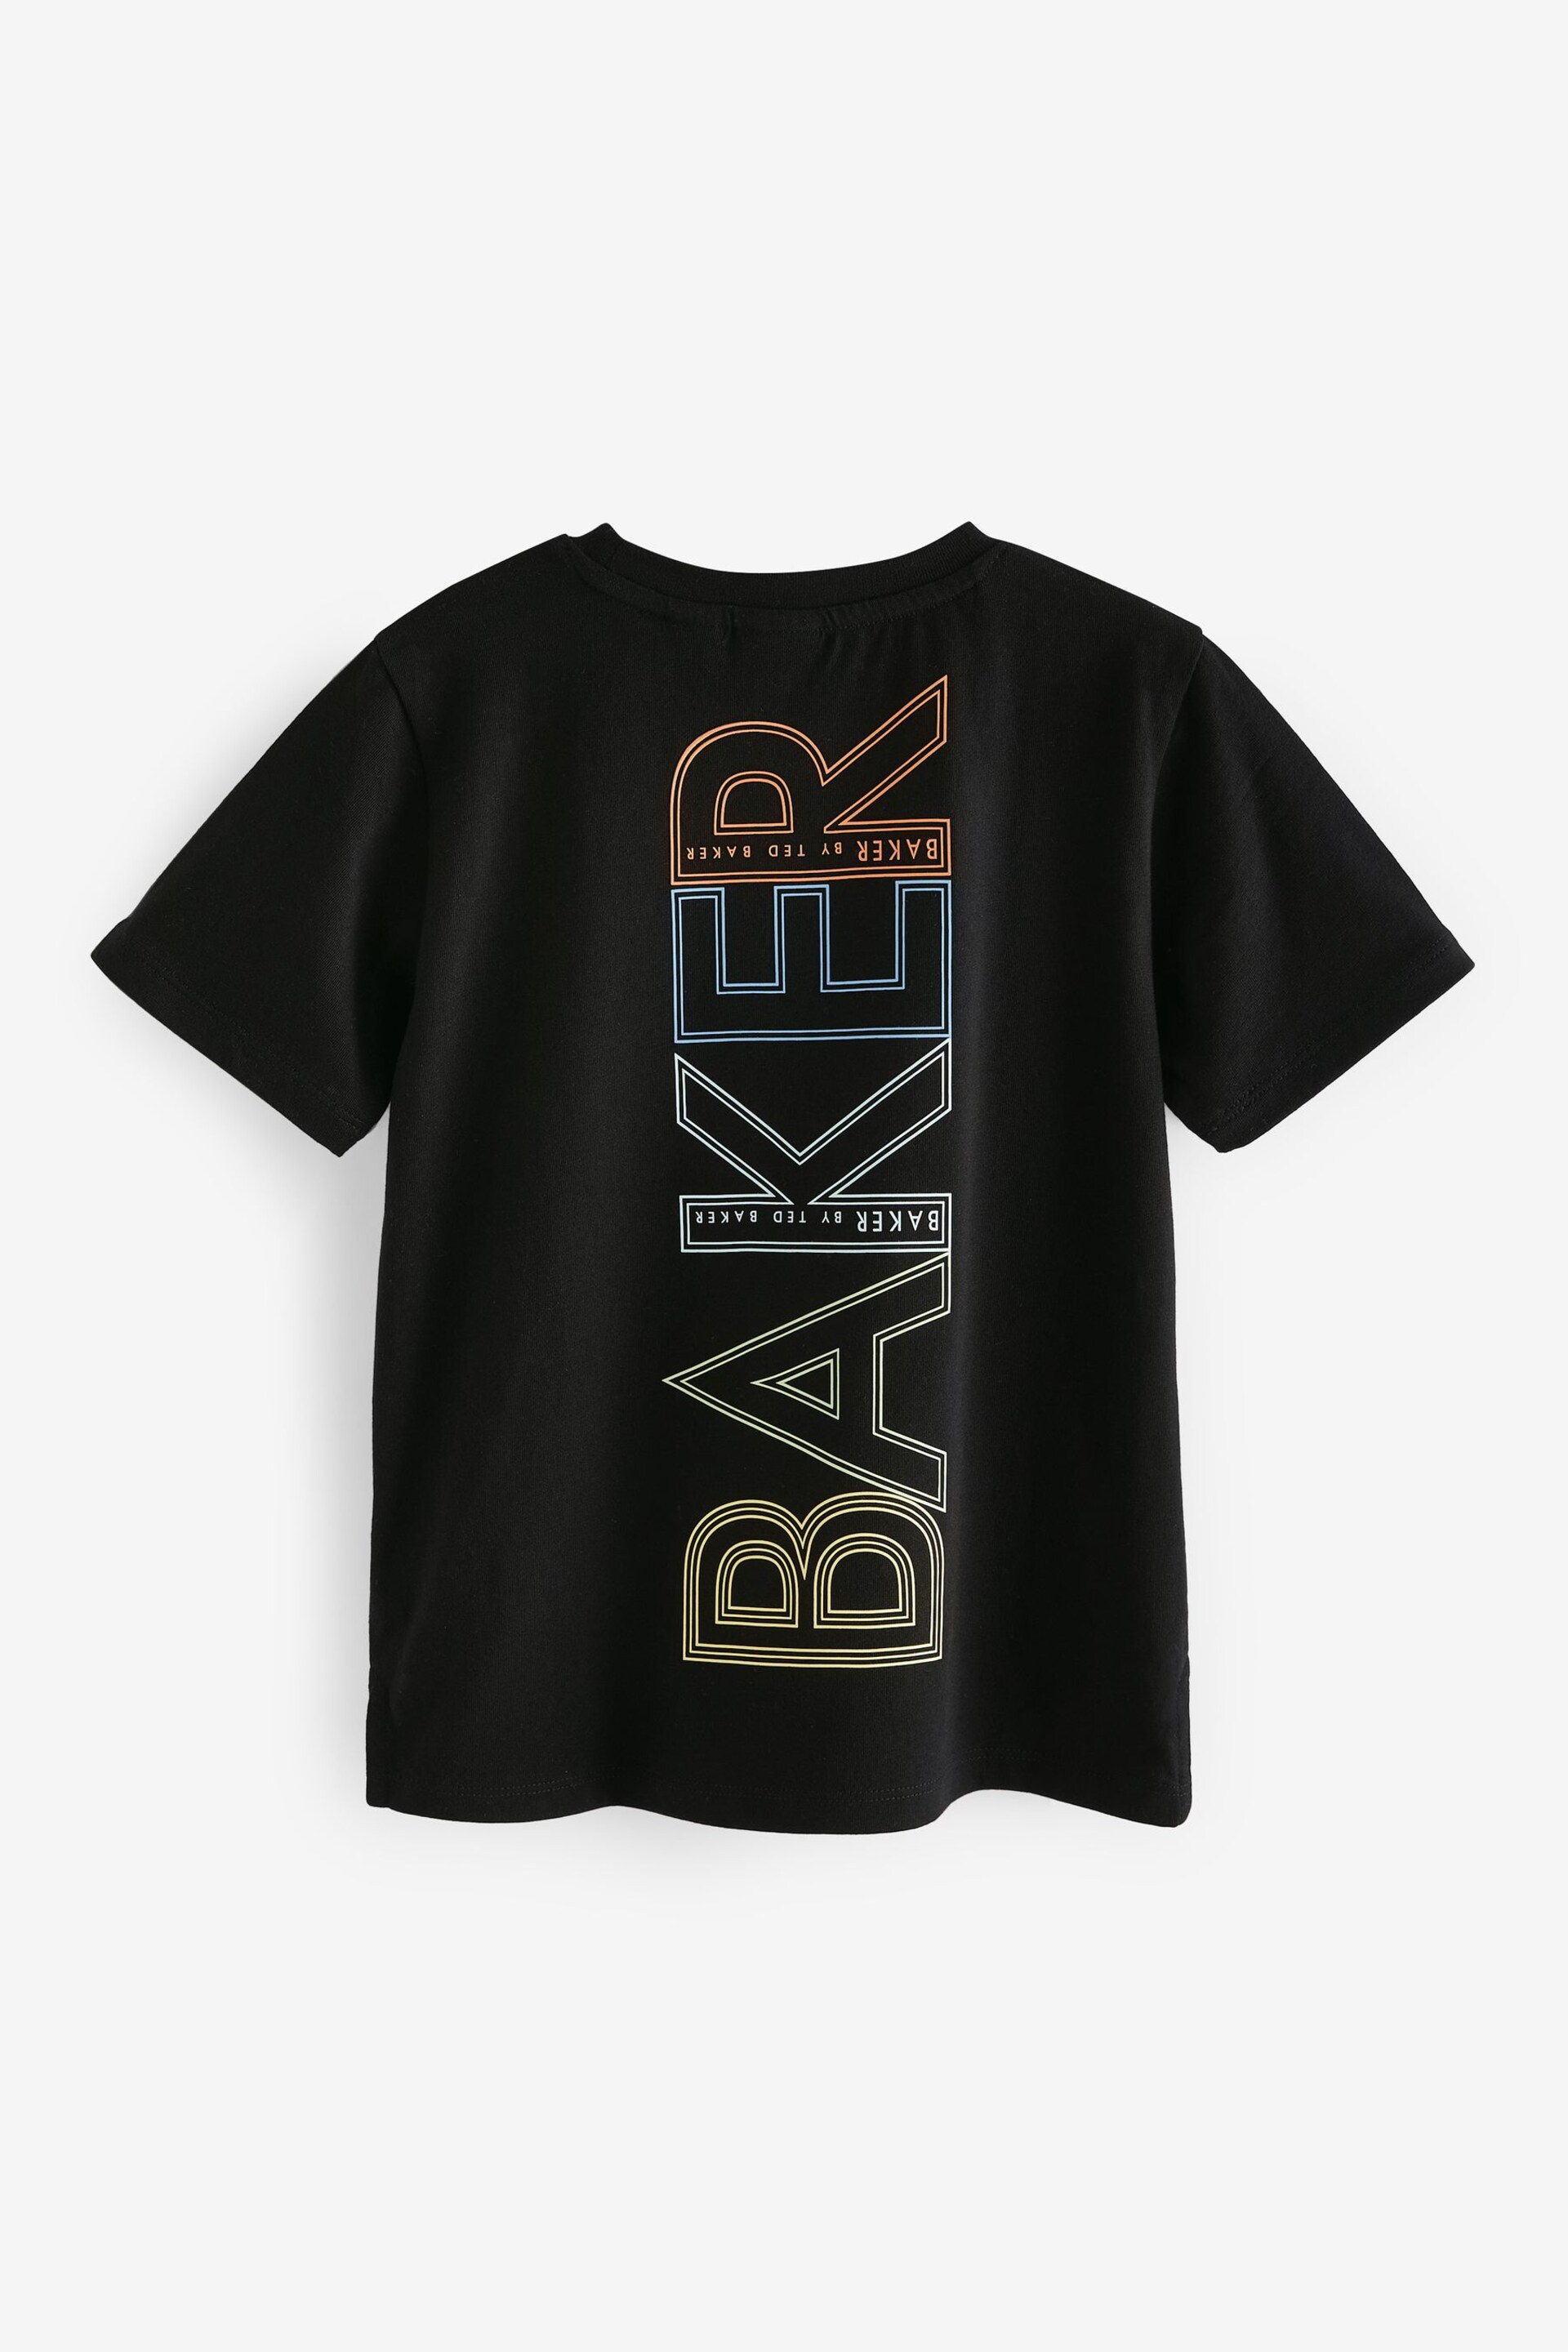 Baker by Ted Baker Graphic Back T-Shirt - Image 7 of 9